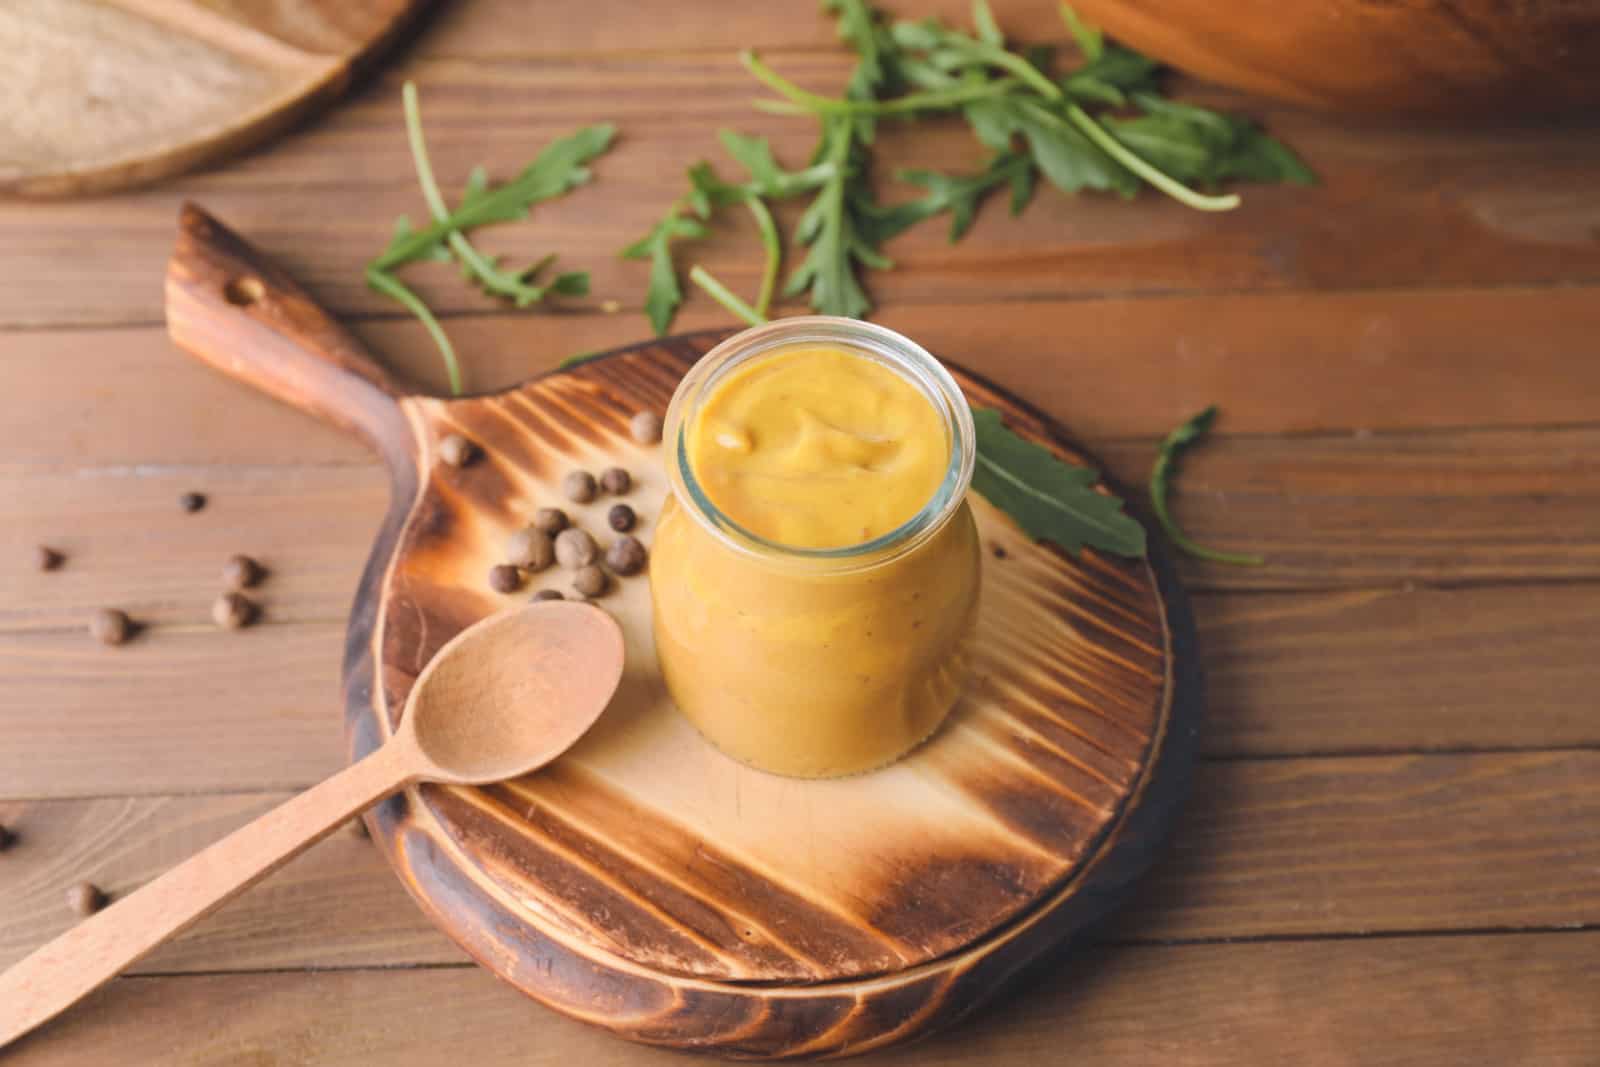 yellow mustard on a wooden table